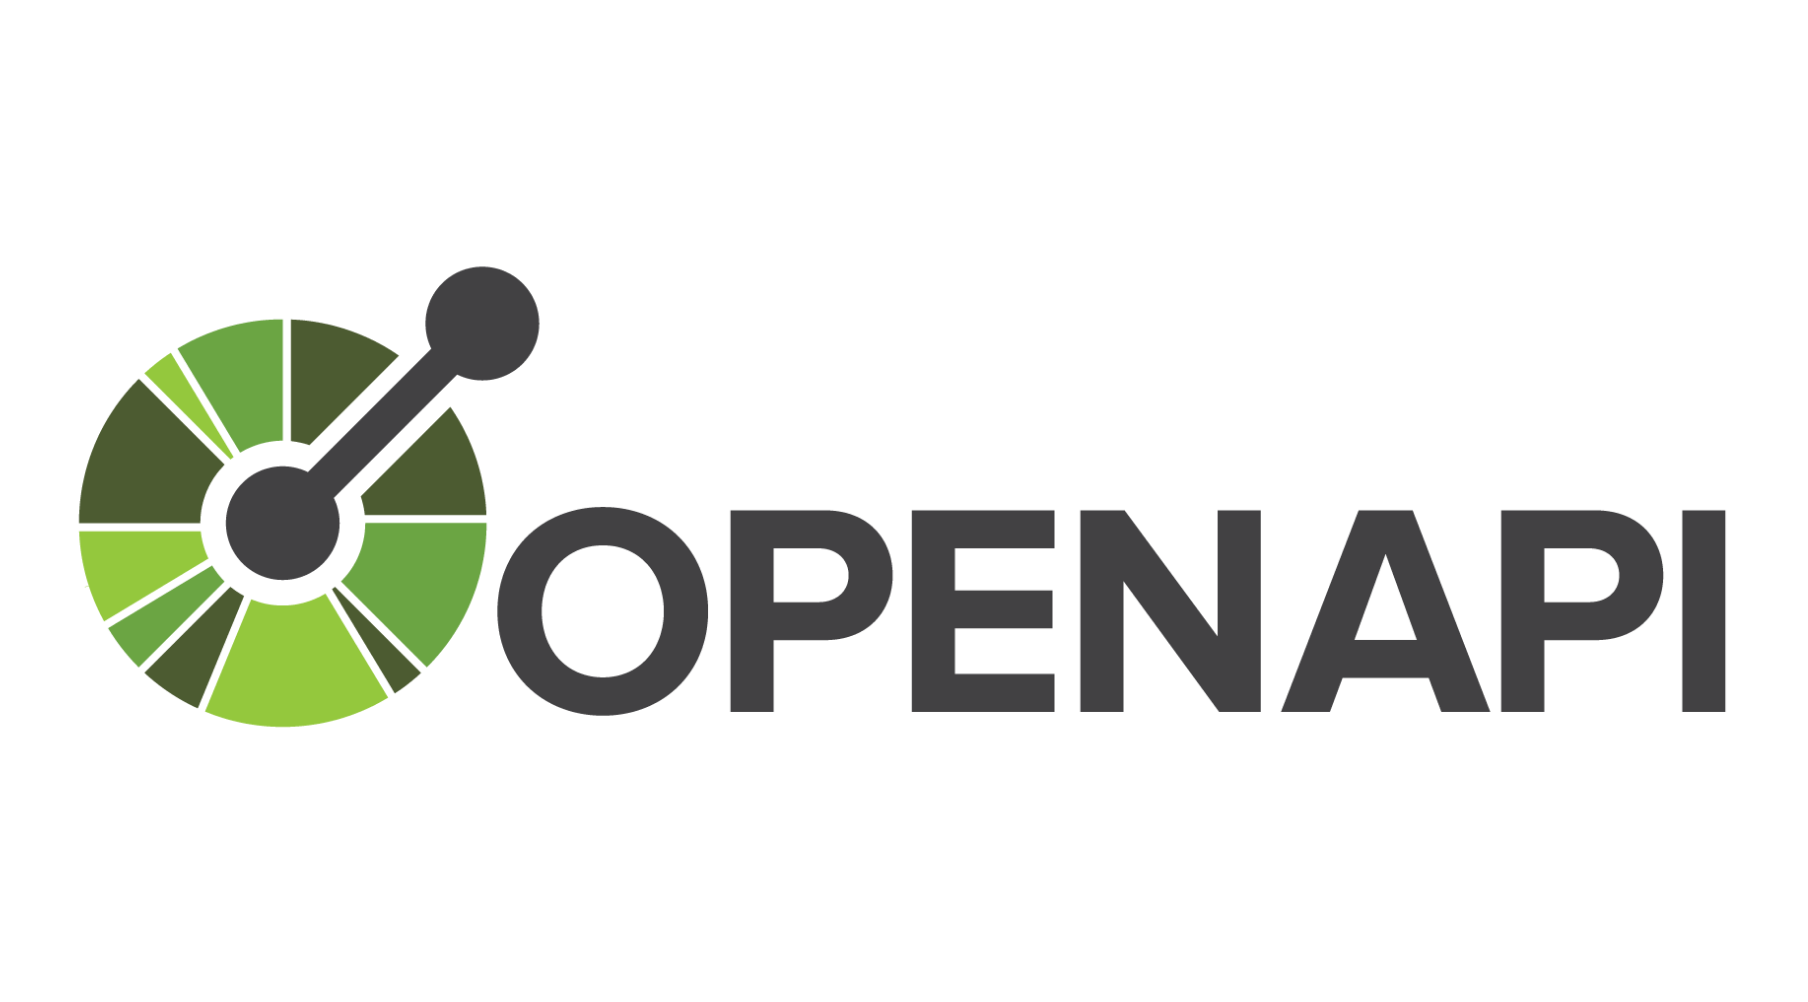 OpenAPI Specification: The Definitive Guide